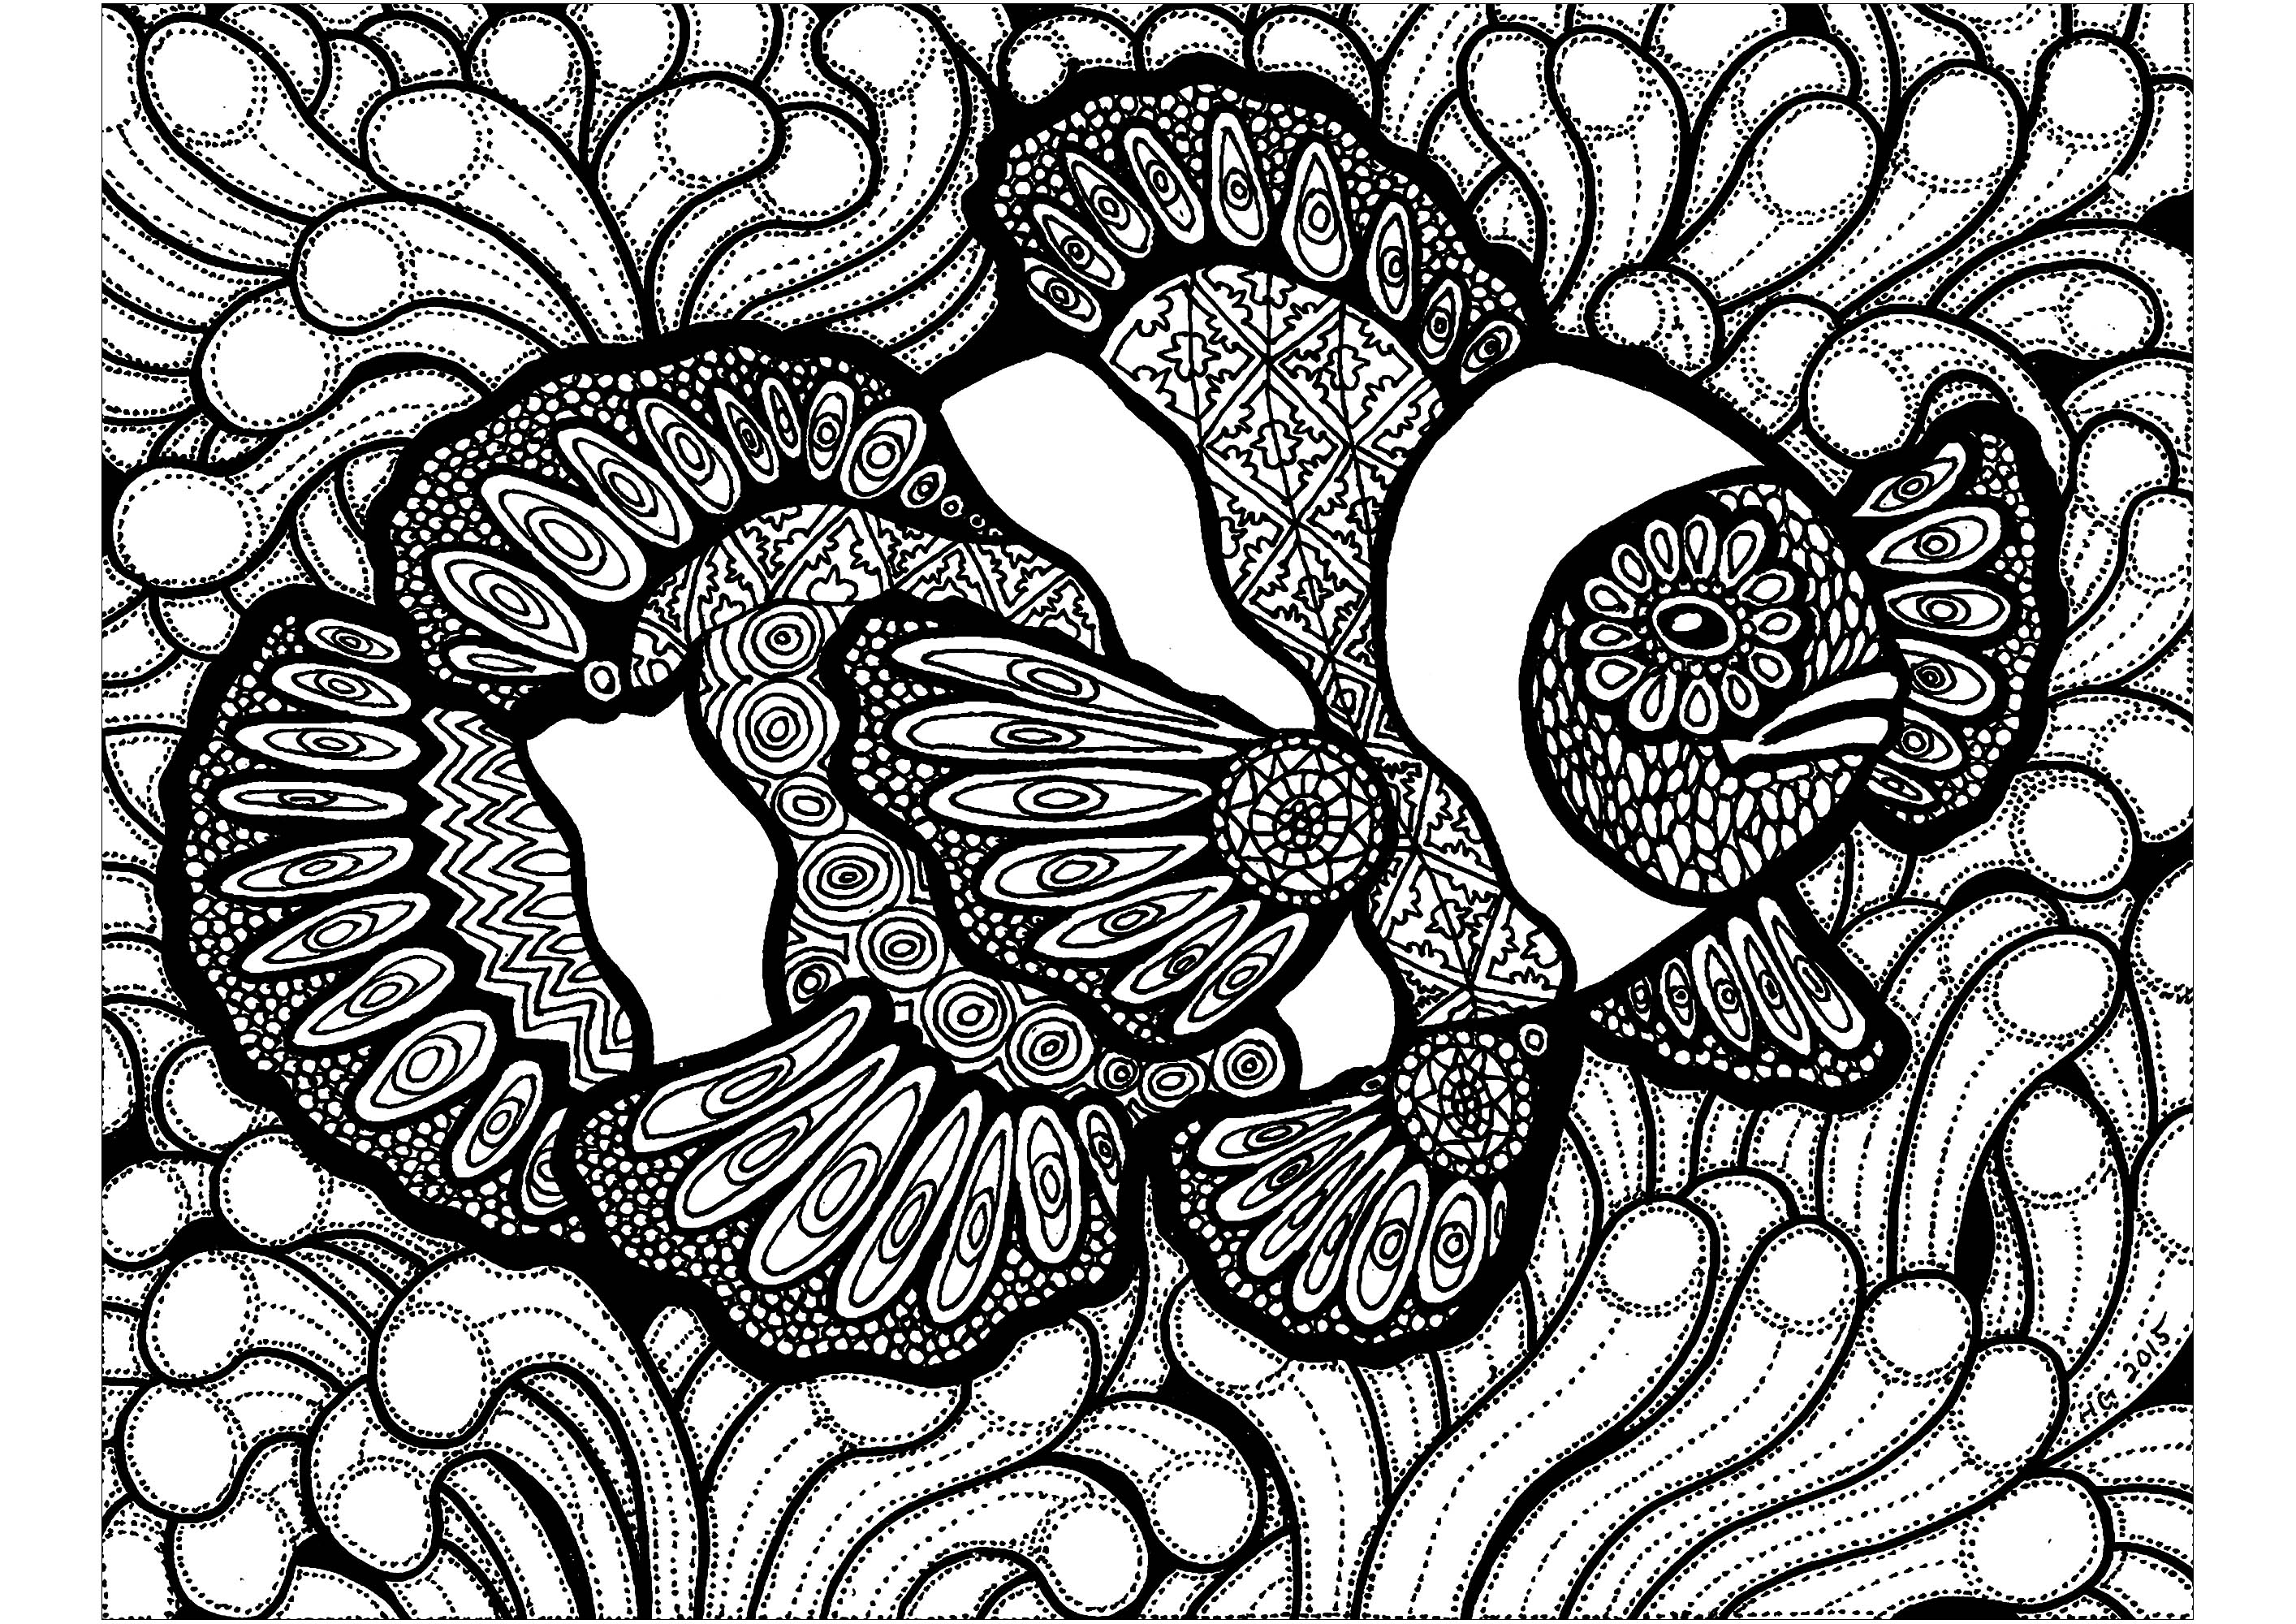 Get deep into the Zentangle water to swim in color!